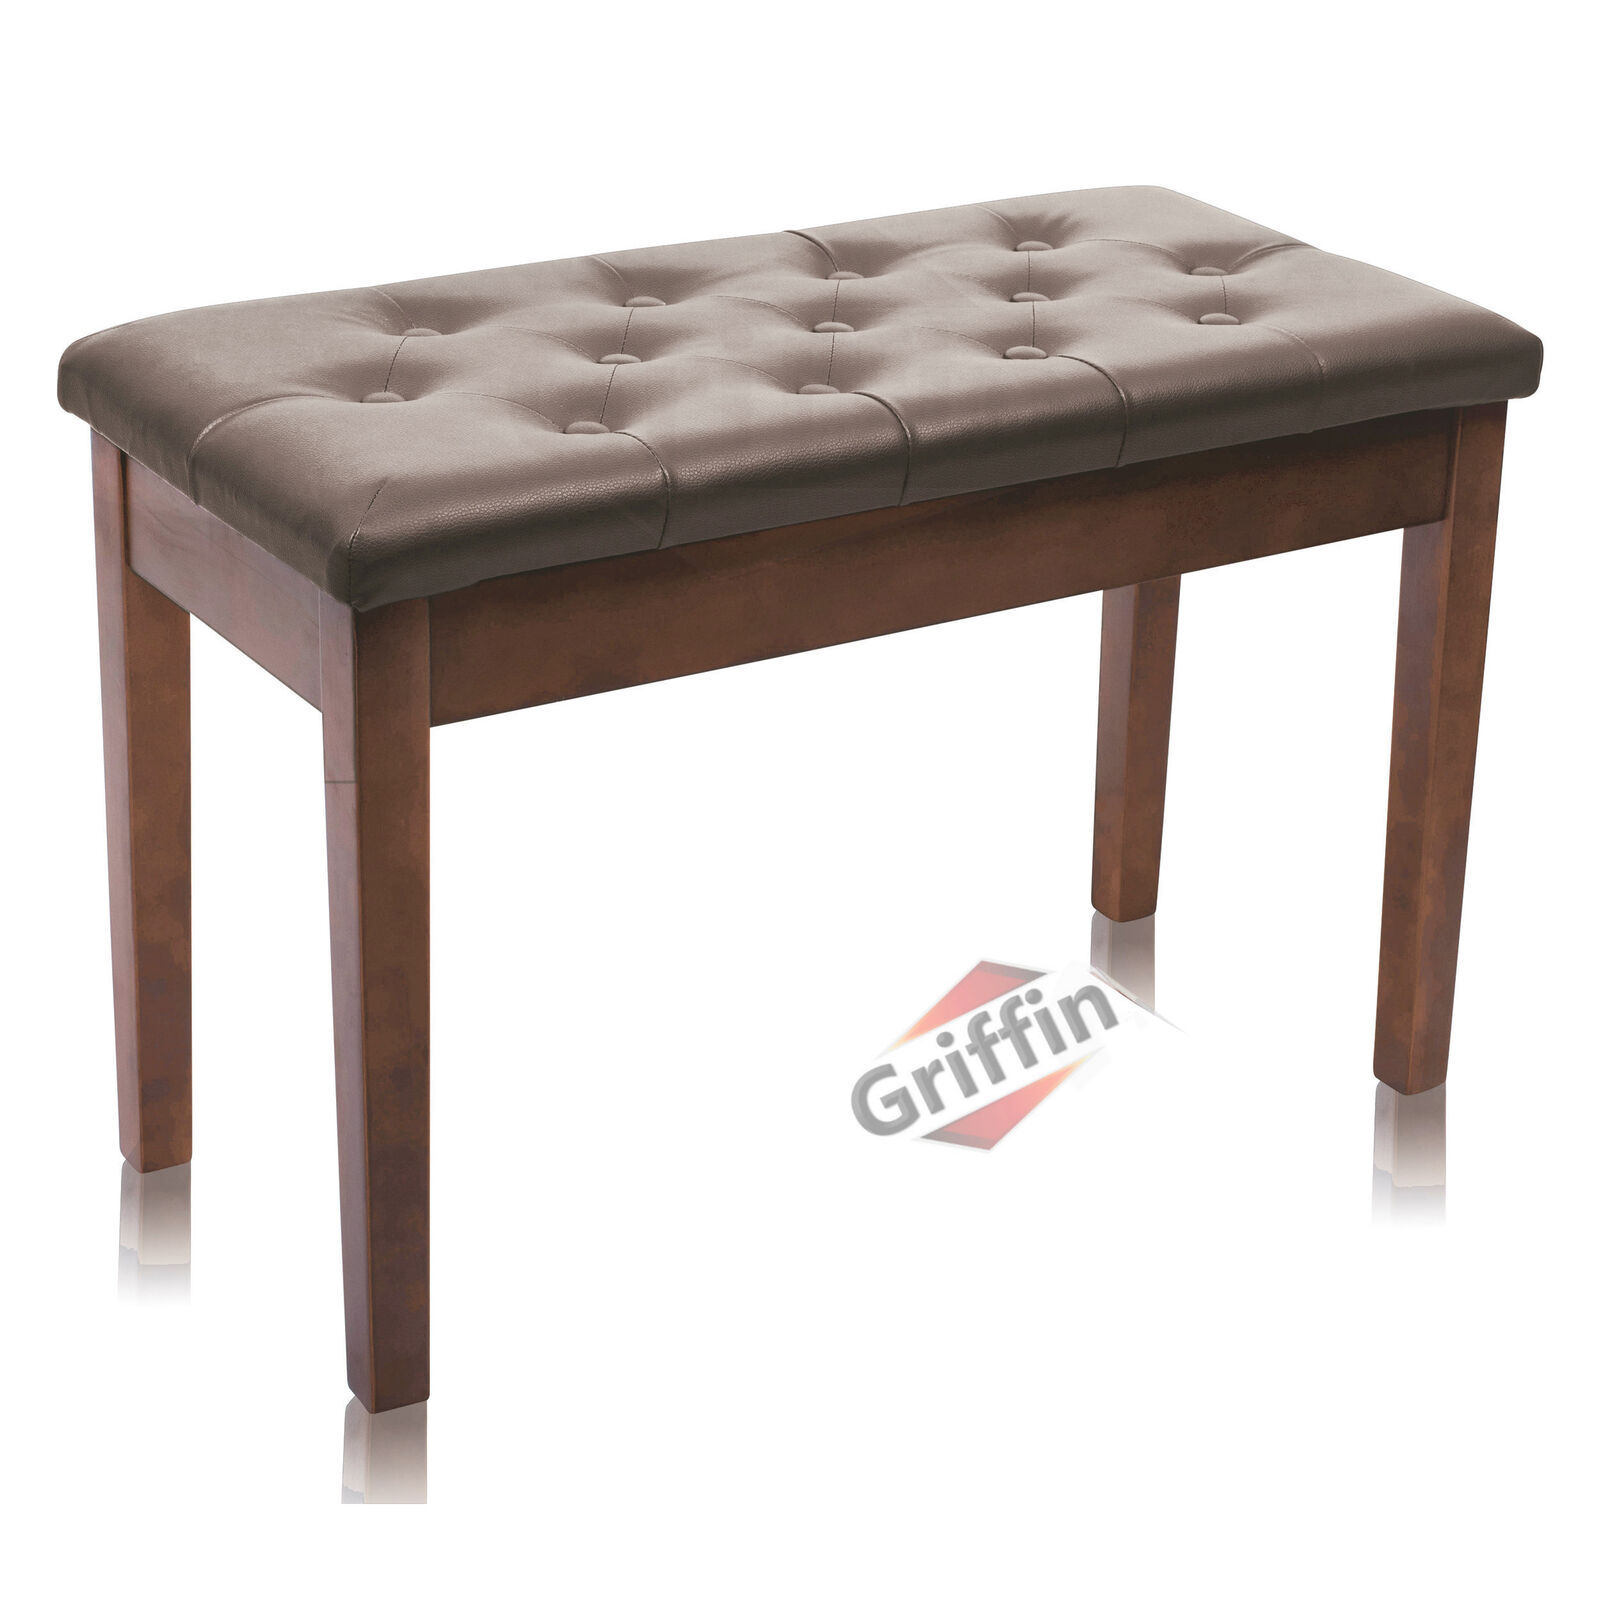 GRIFFIN Brown Leather Piano Bench Wood Keyboard Seat Music Storage Guitar Stool